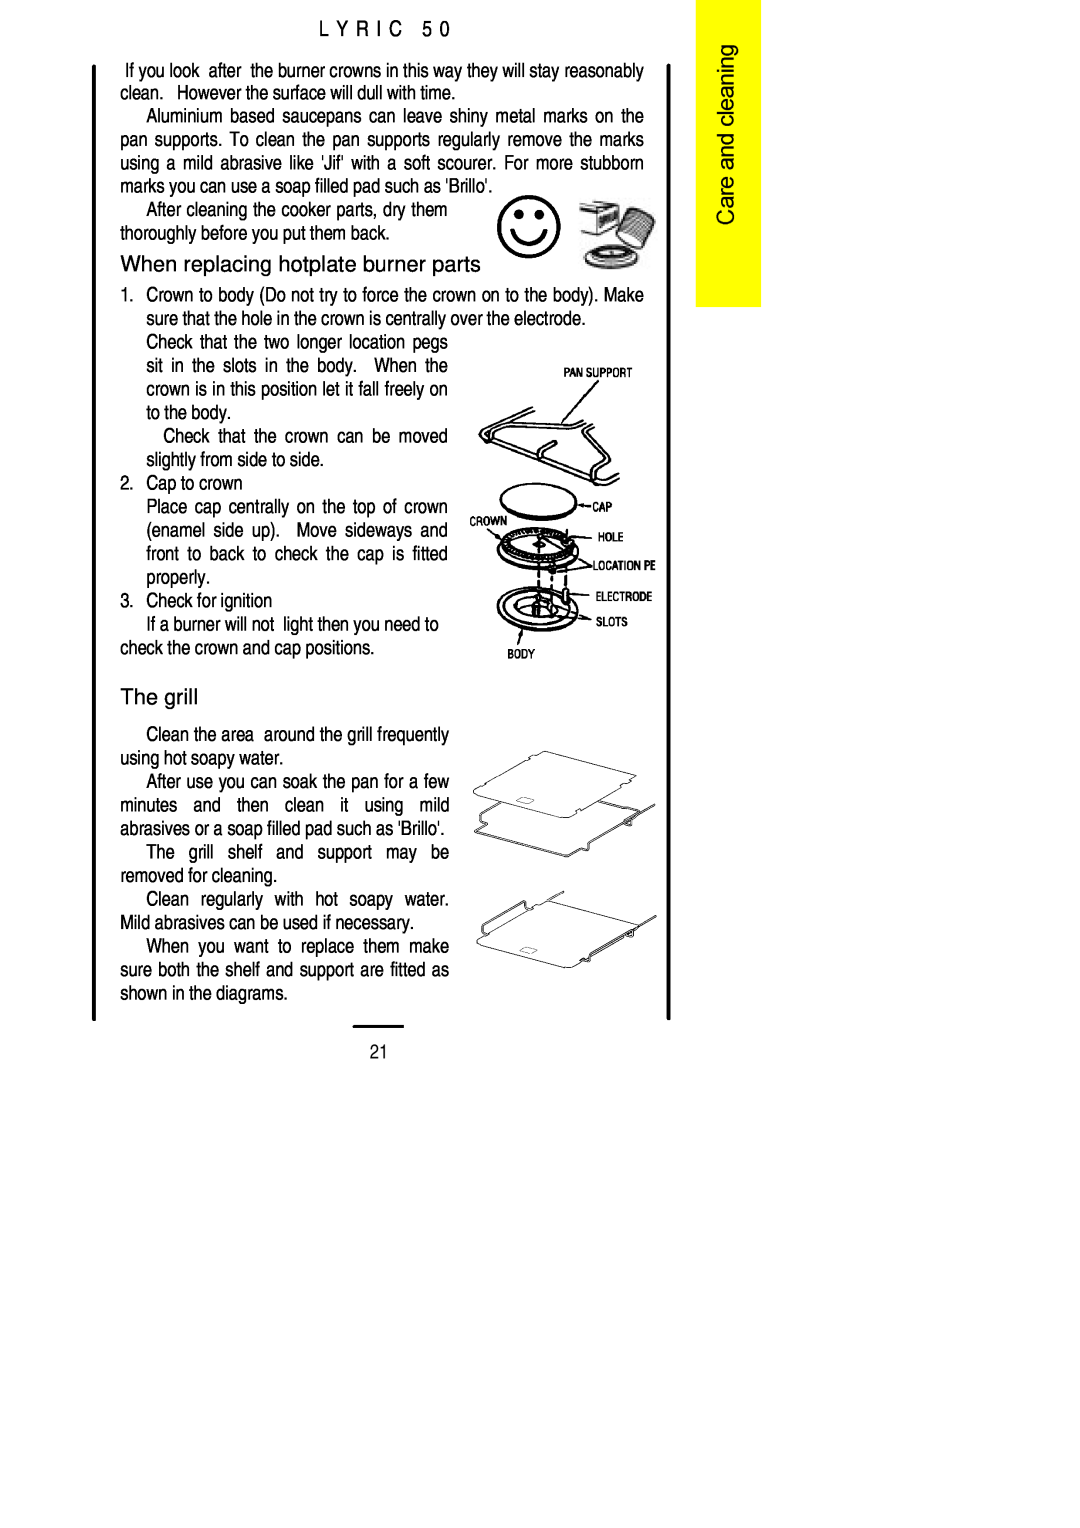 Electrolux Lynic 50 installation instructions When replacing hotplate burner parts, The grill, L Y R I C 